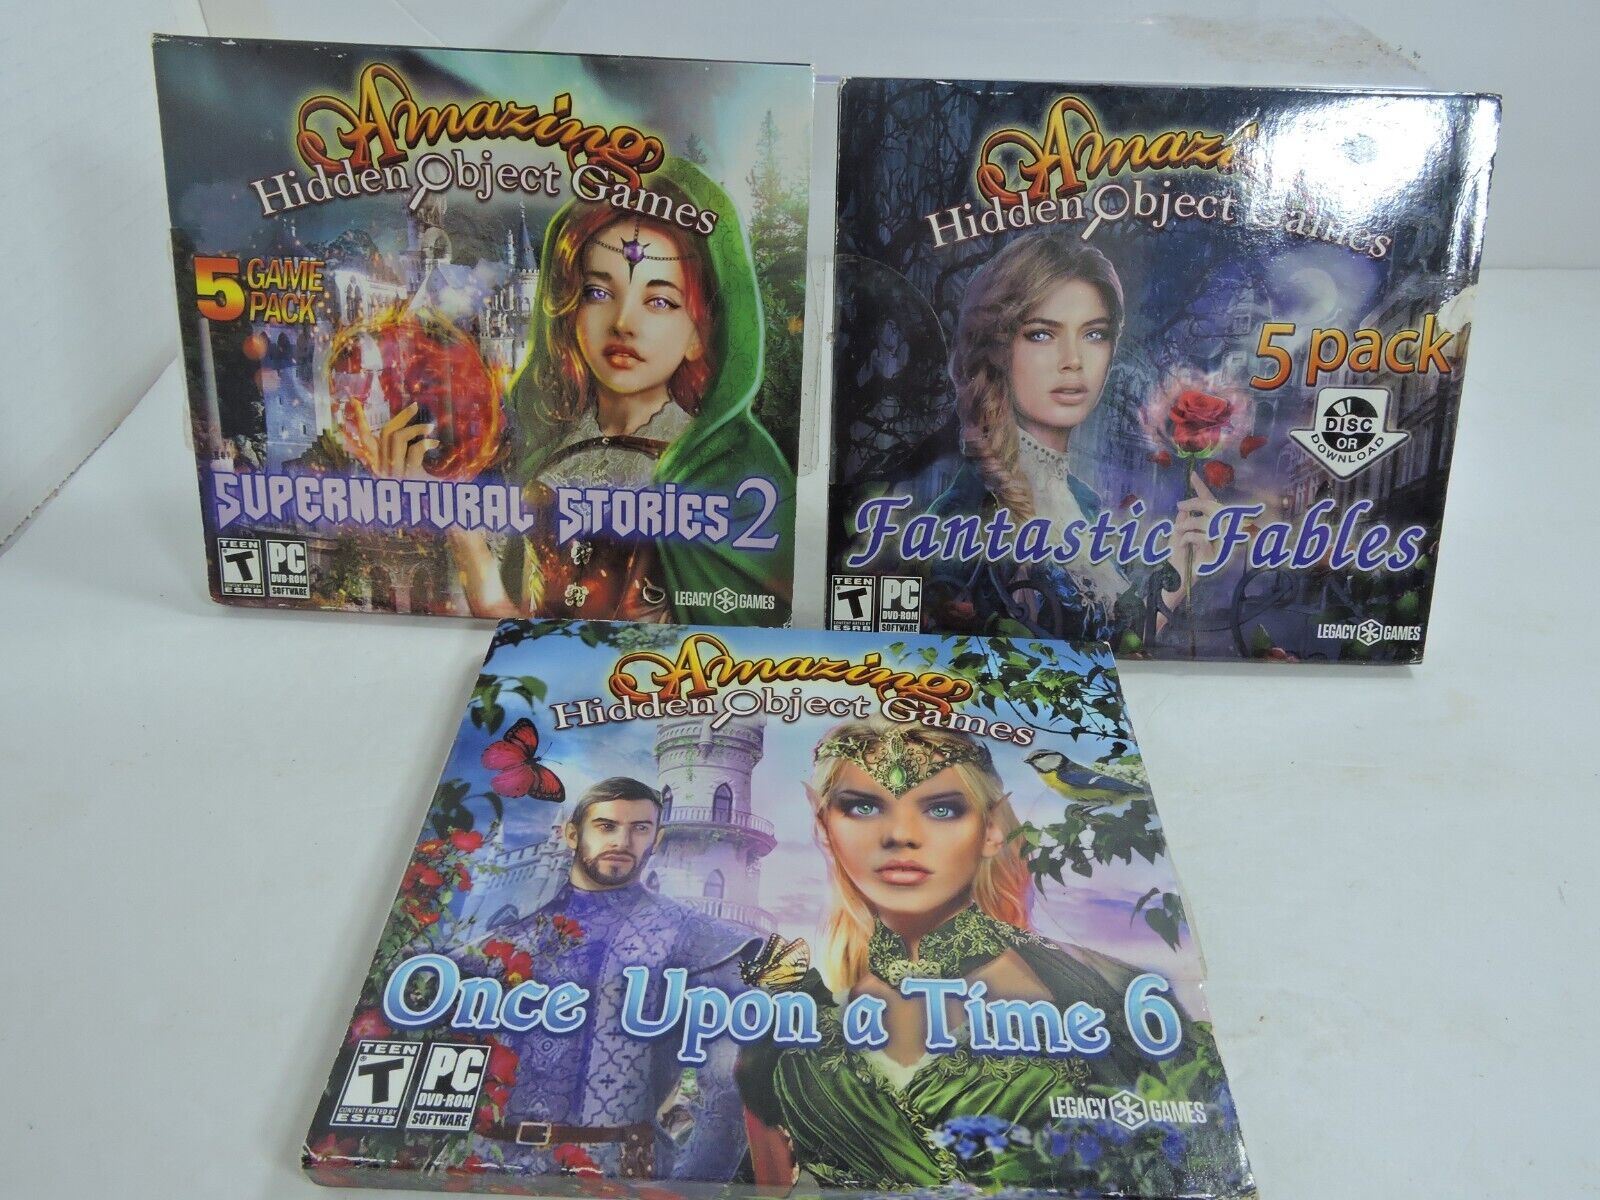 Legacy Games amazing hidden object games lot of 3 PC games